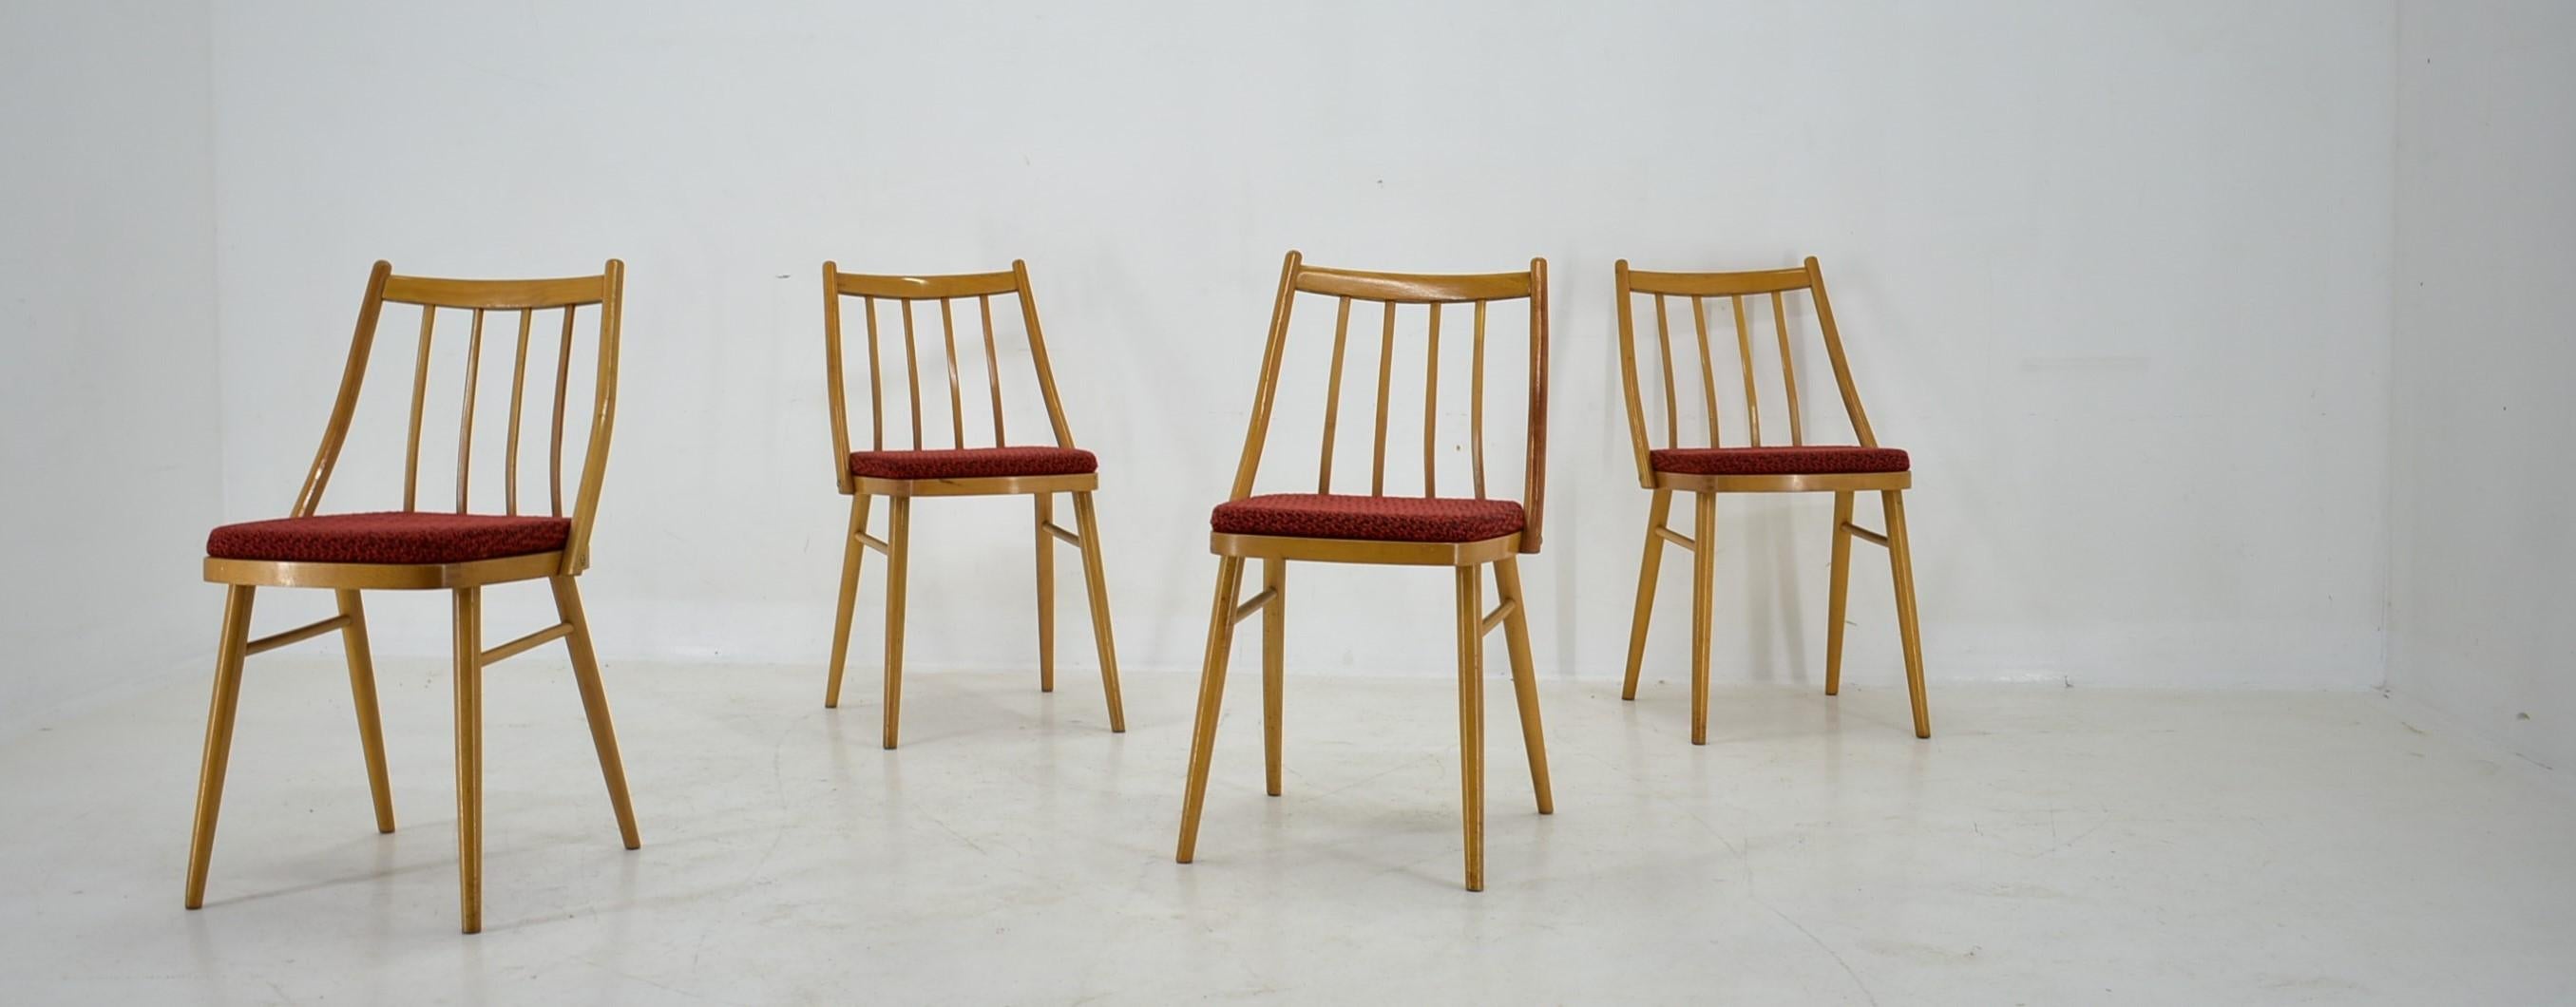 1960s Antonin Suman Beech Dining Chairs, Set of 4 For Sale 5